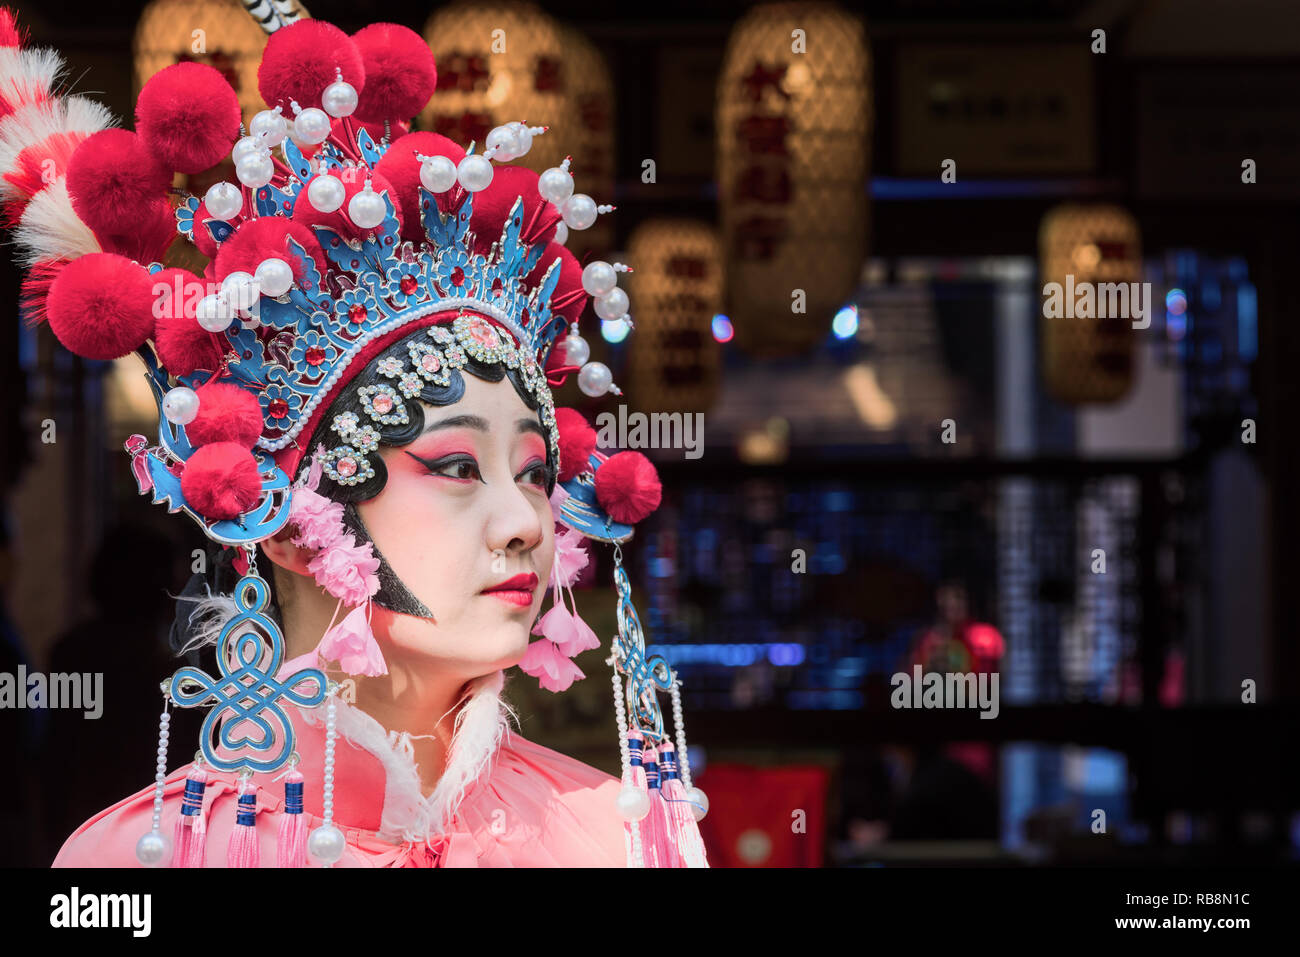 Chengdu, Sichuan Province, China - Nov 18, 2018 : Portrait of a yound woman dressed in Sichuan Opera traditional costume in Jinli street touristic area. Stock Photo